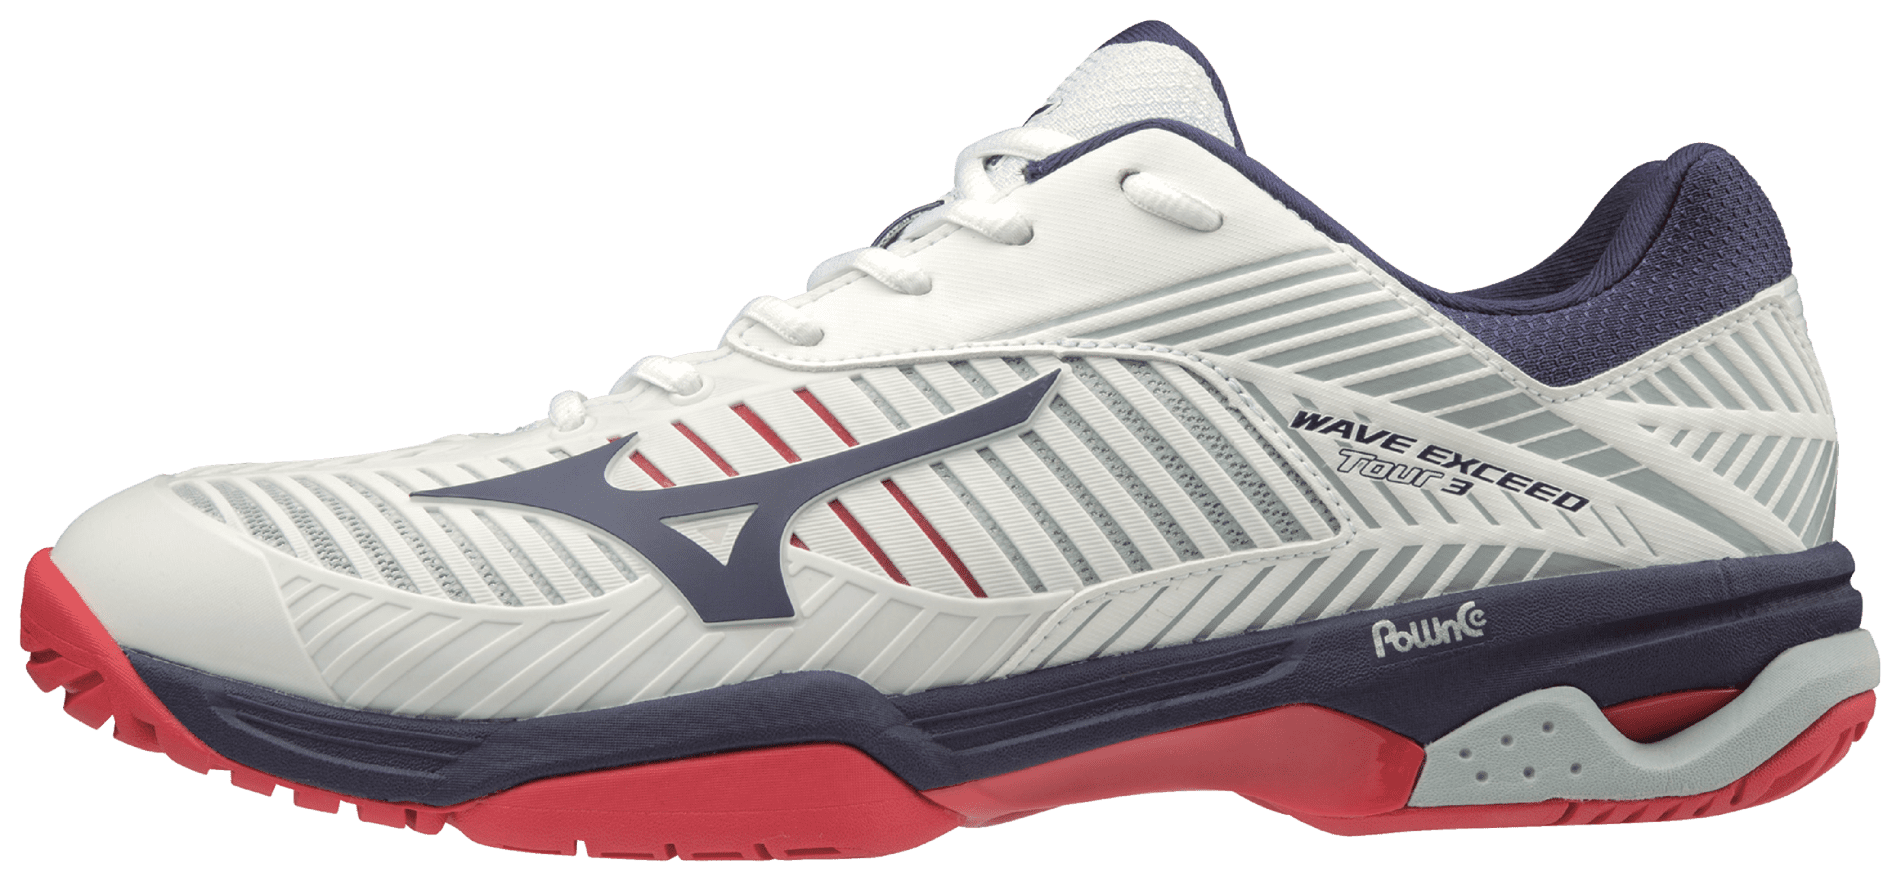 Mizuno Mens Wave Exceed Tour 3 AC Tennis Shoes Navy Blue Red White Sports 